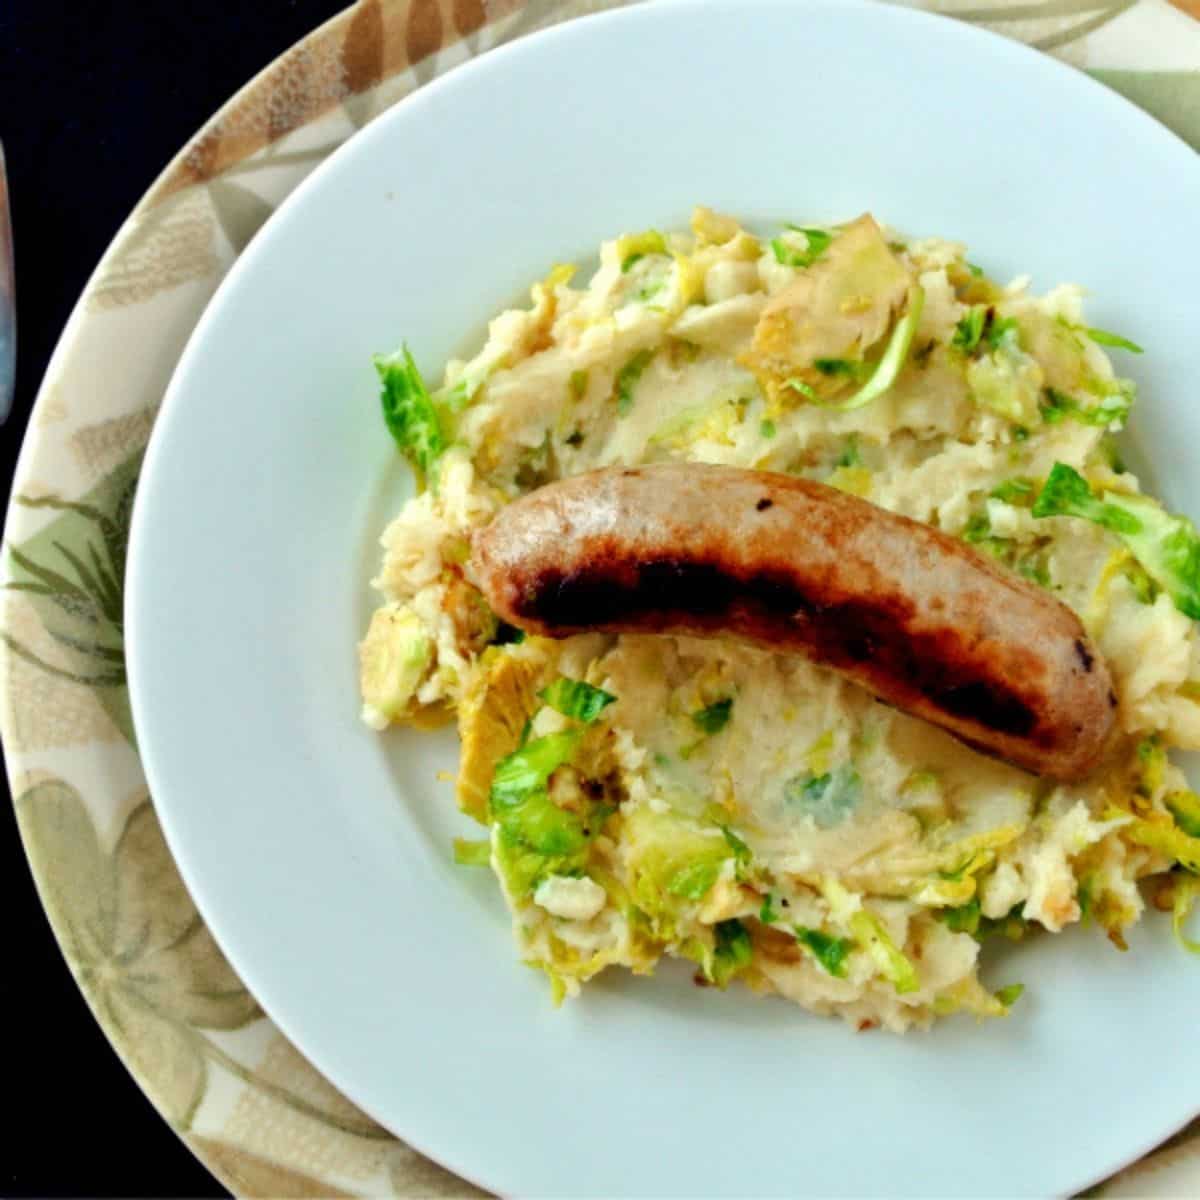 Mashed potatoes with Brussel sprouts mixed in with a Irish banger sausage on top all sitting on a white plate on top of a leaf textured plate.